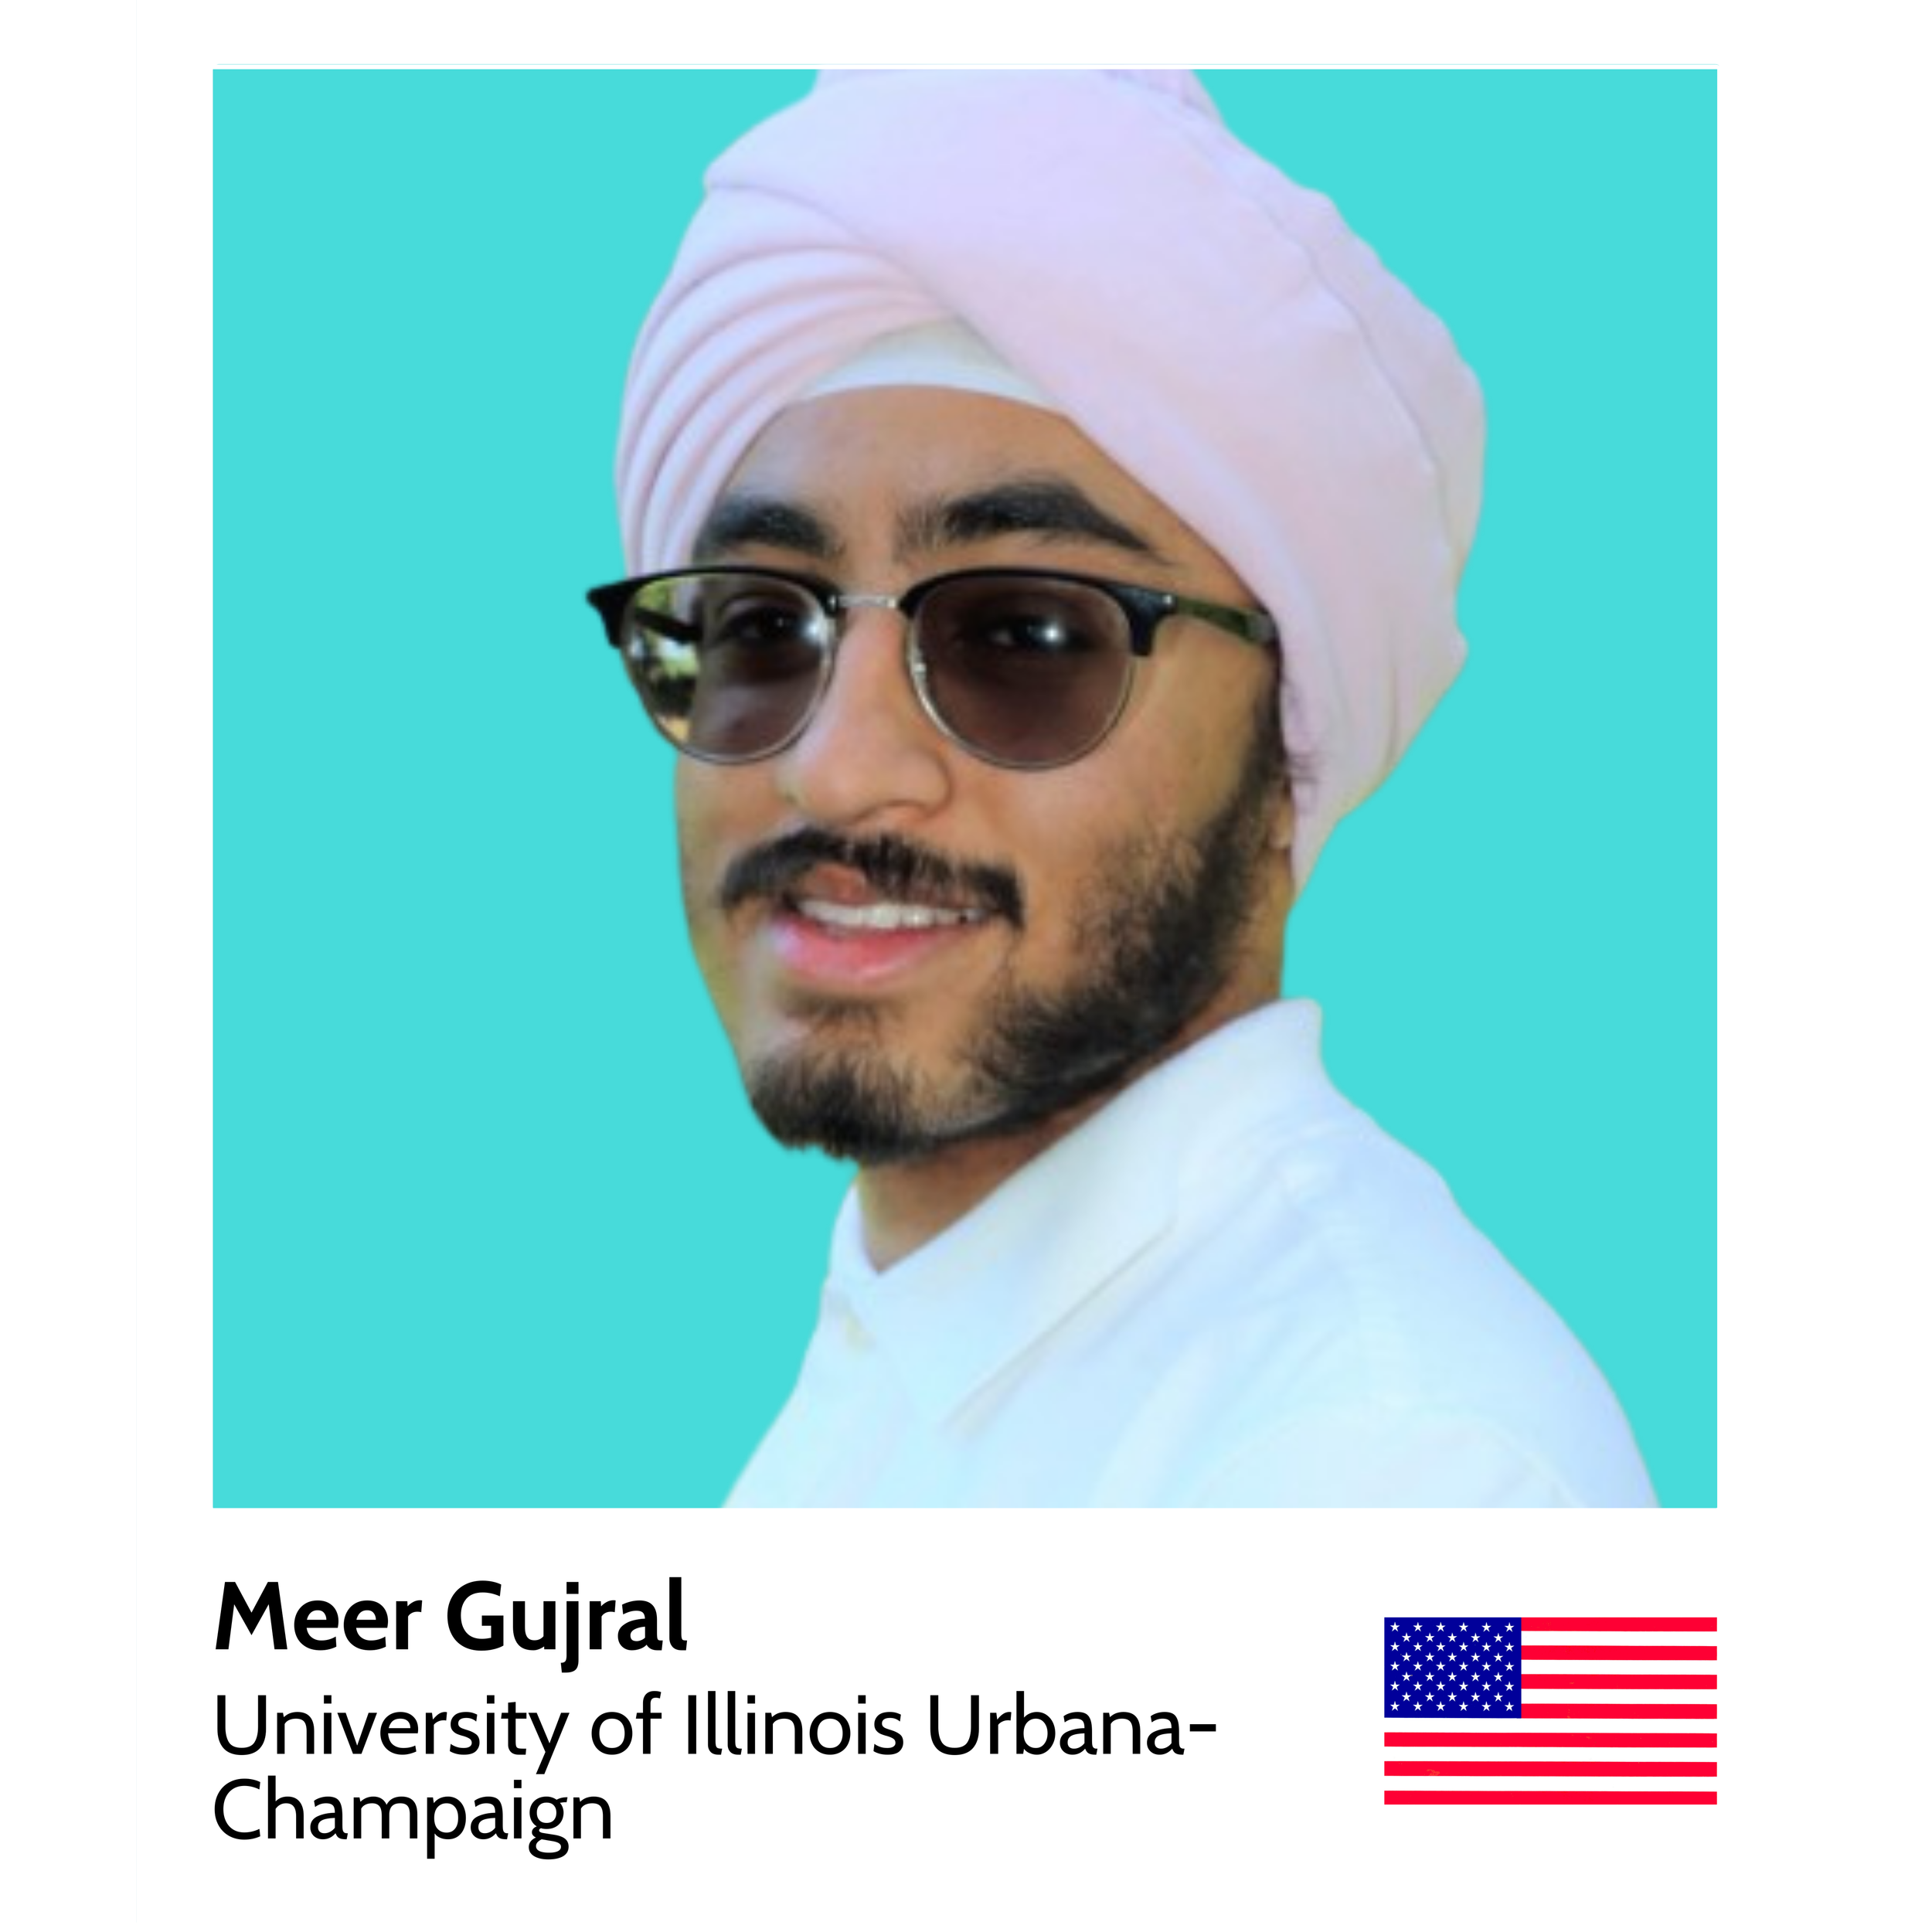 Your_Big_Year_ibm_zsystems_ambassador_ Meer_Gujral_University_of_Illinois_Urbana-Champaign.png